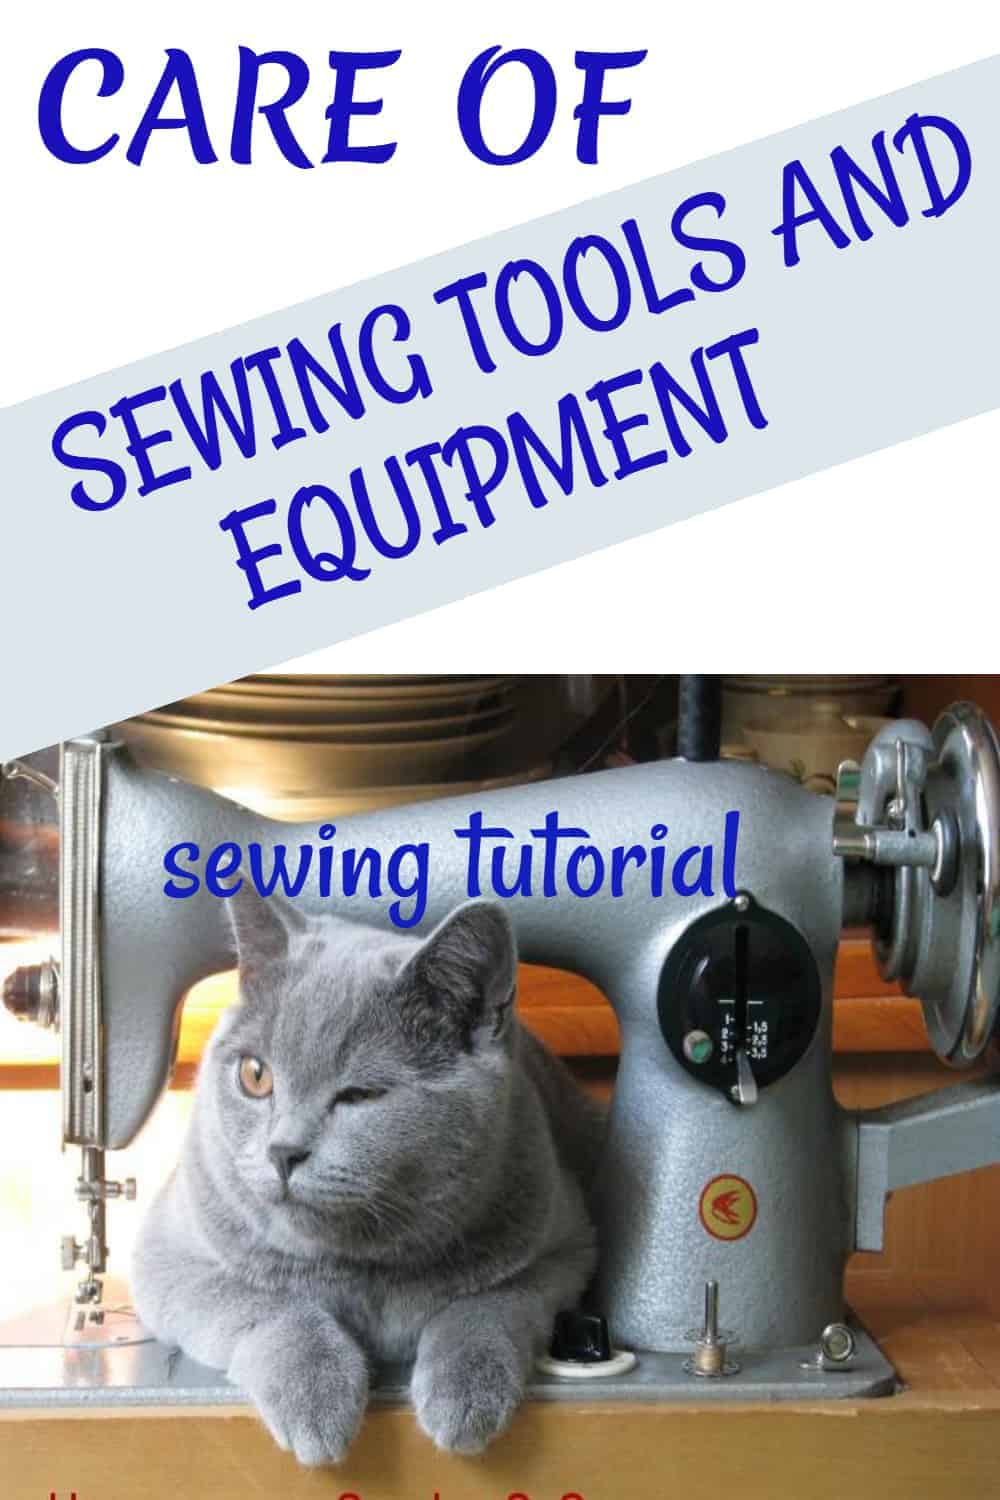 how do you take care of sewing tools?